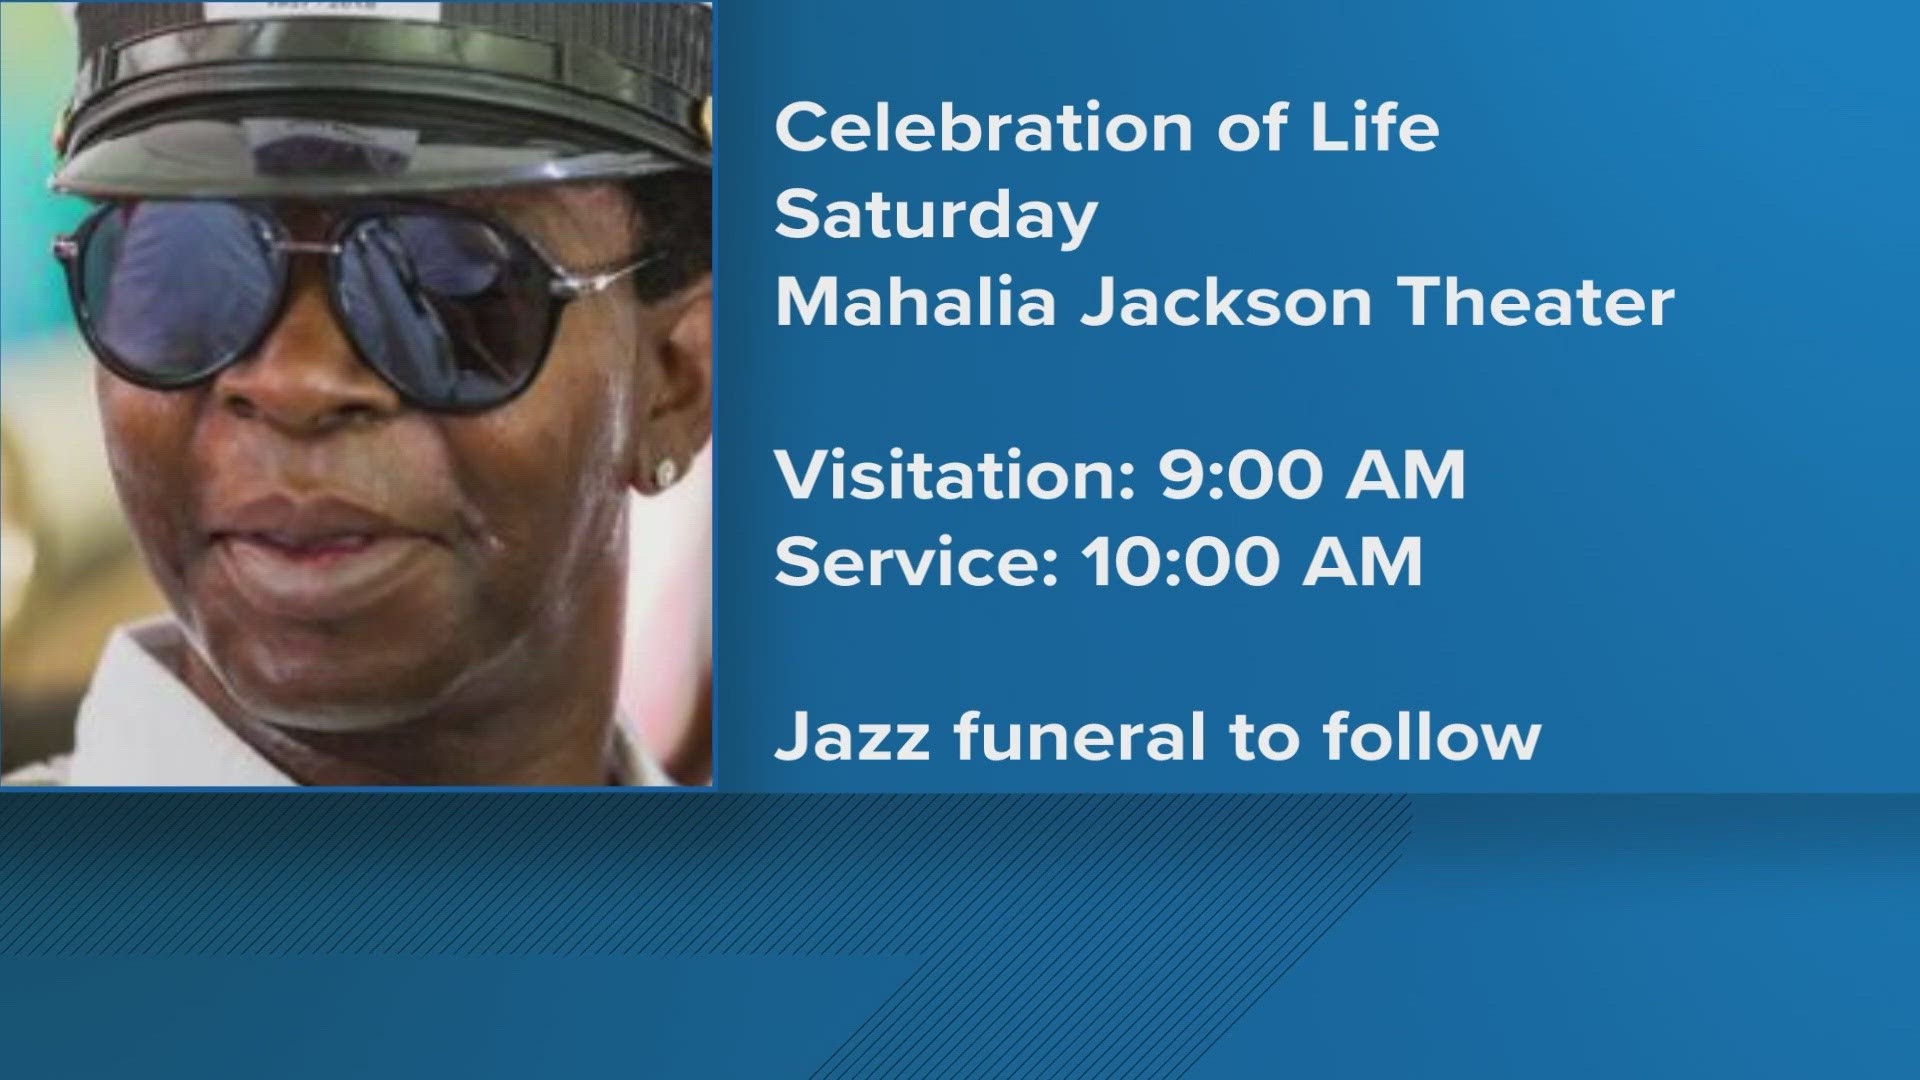 The service will be held on Saturday, Feb. 24 at the Mahalia Jackson Theater for the Performing Arts, at 10 a.m. and visitation begins at 9 a.m.